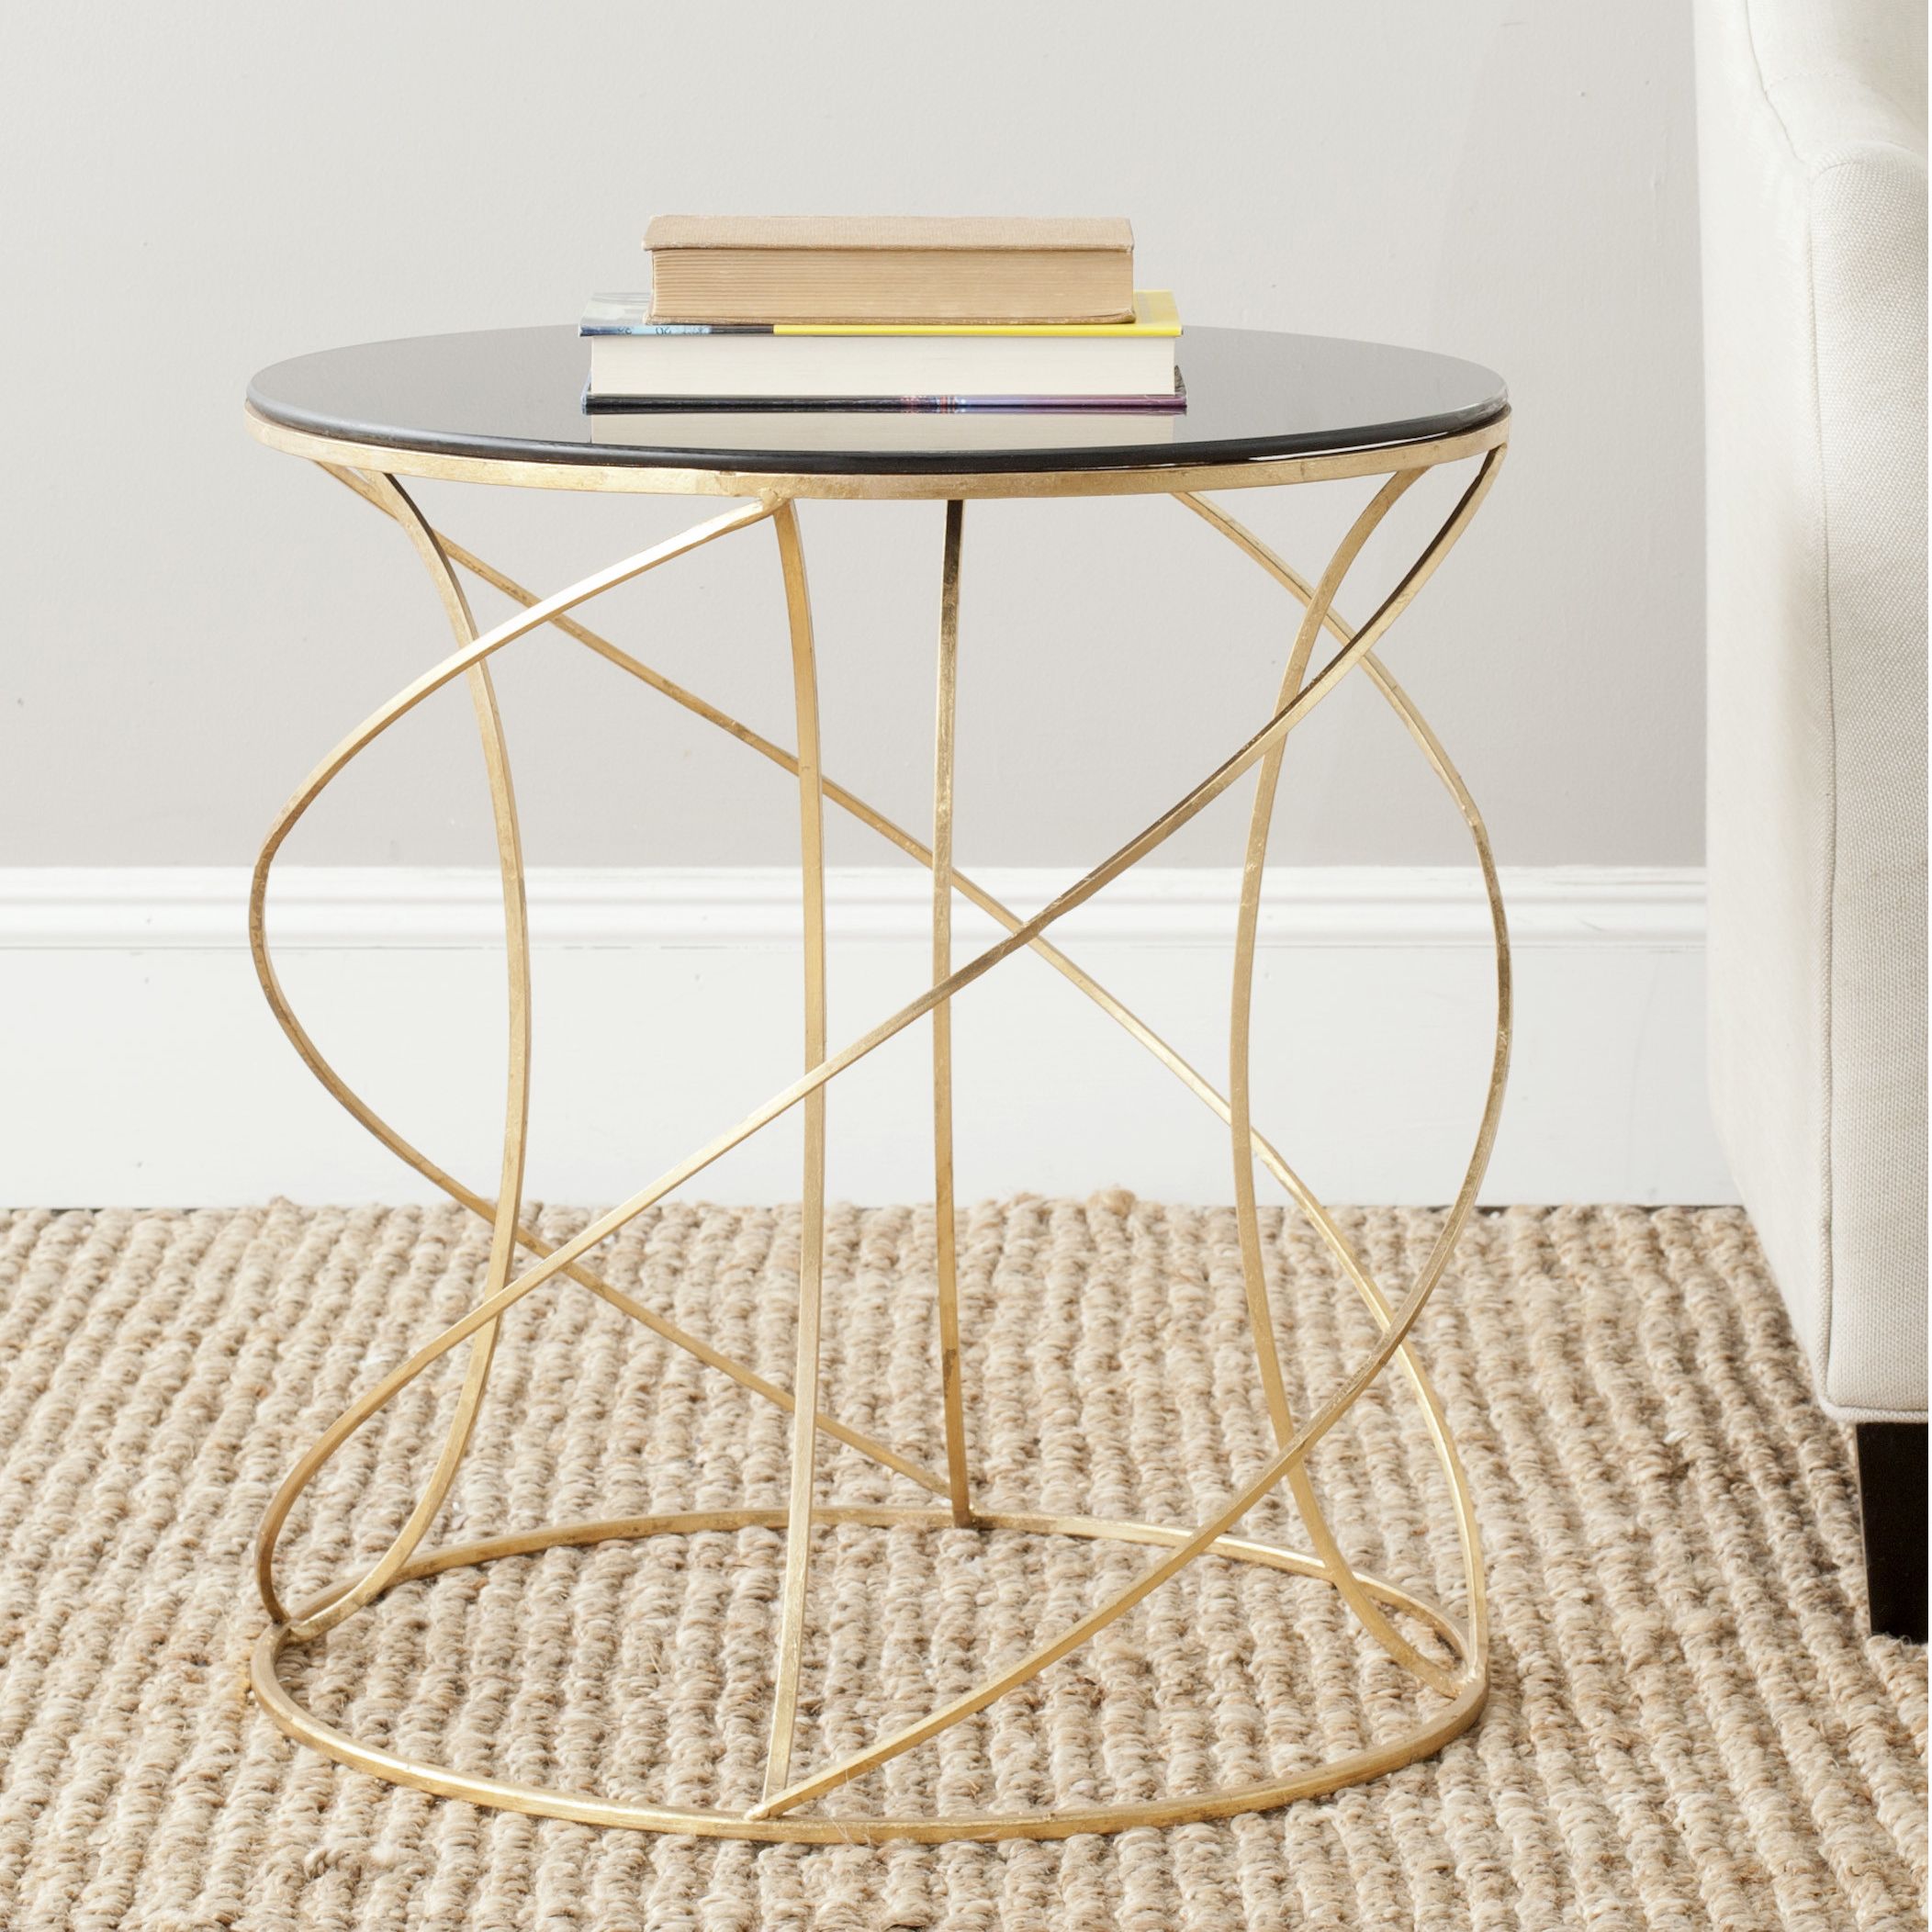 safavieh treasures cagney gold black top accent table ping great coffee sofa end tables antique marble side red metal furniture bags modern edmonton breakfast house designs grinch